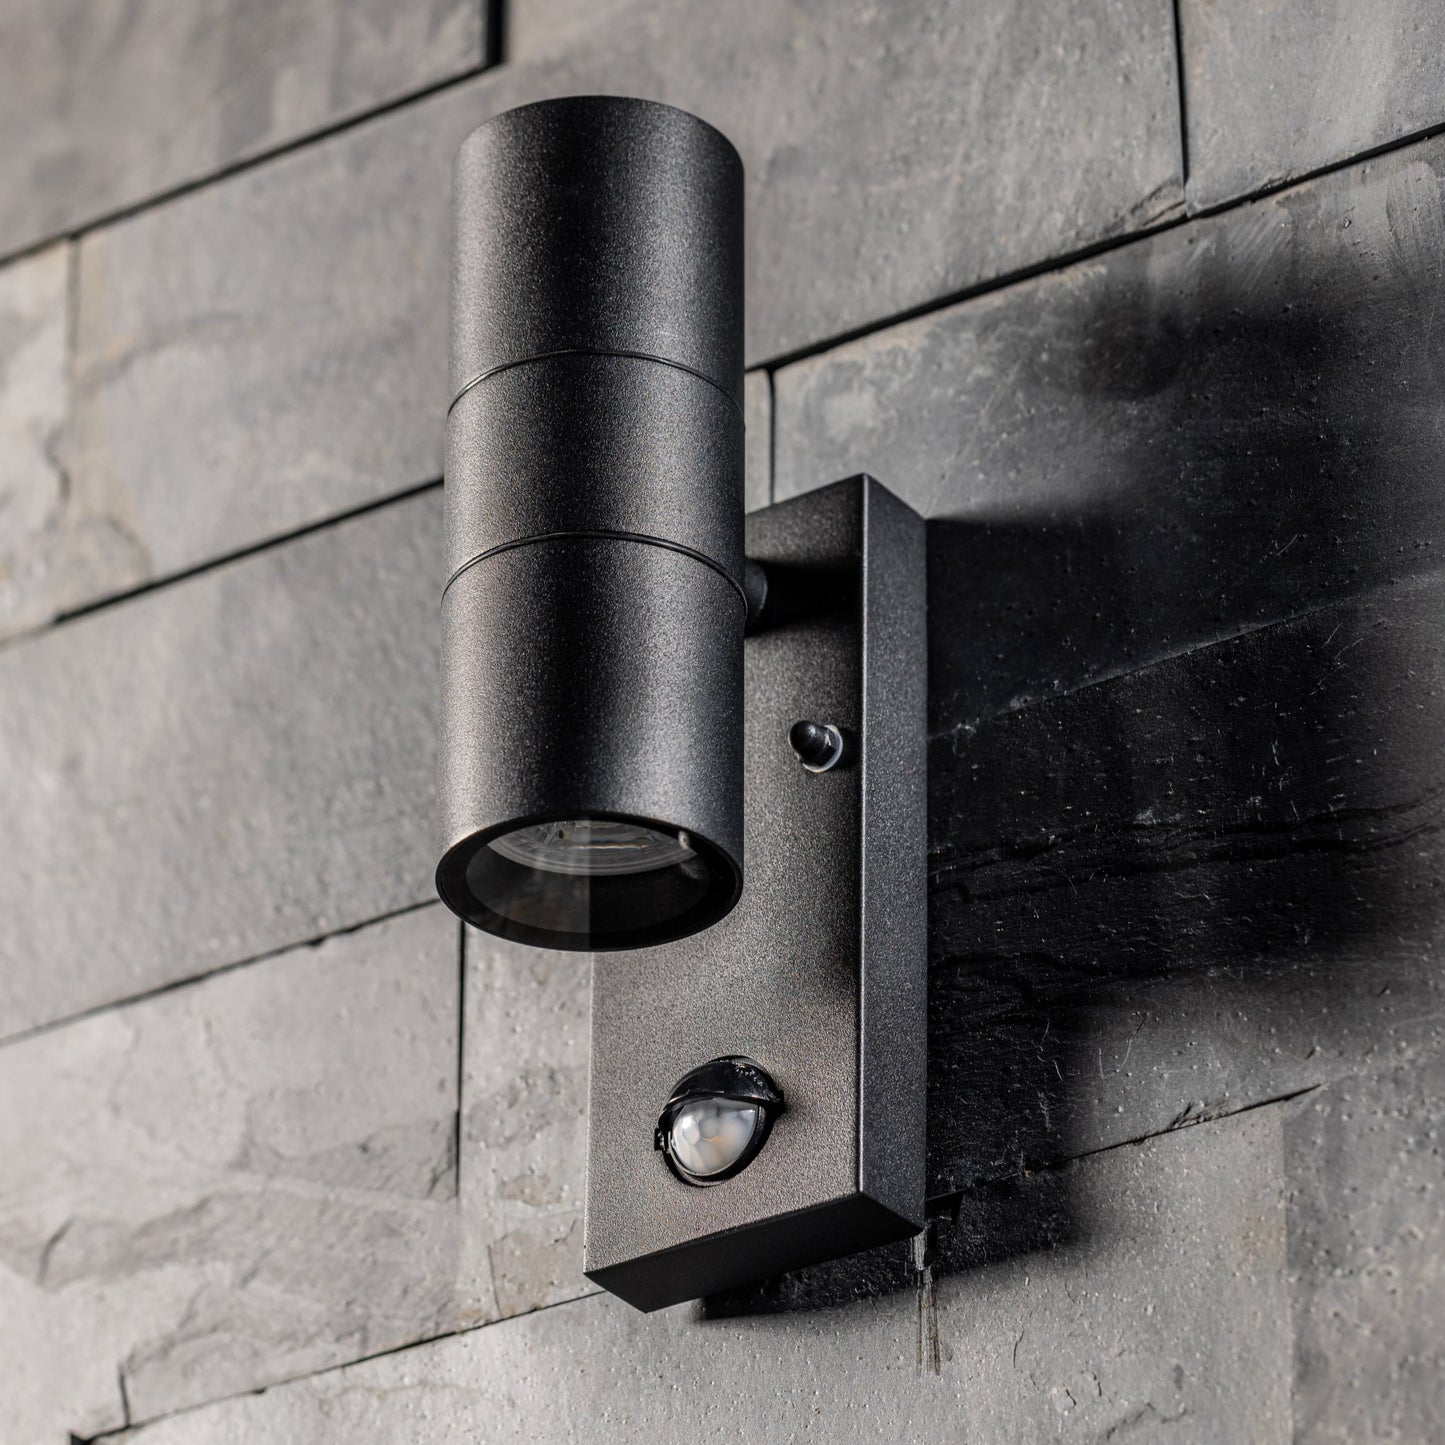 Our Leon outdoor single down light is modern and stylish in its appearance.  It comes in a cylinder design mounted on a rectangle back plate complete with clear glass diffuser and built in PIR motion sensor. It is designed for durability and longevity with its robust material producing a fully weatherproof and water resistant light fitting